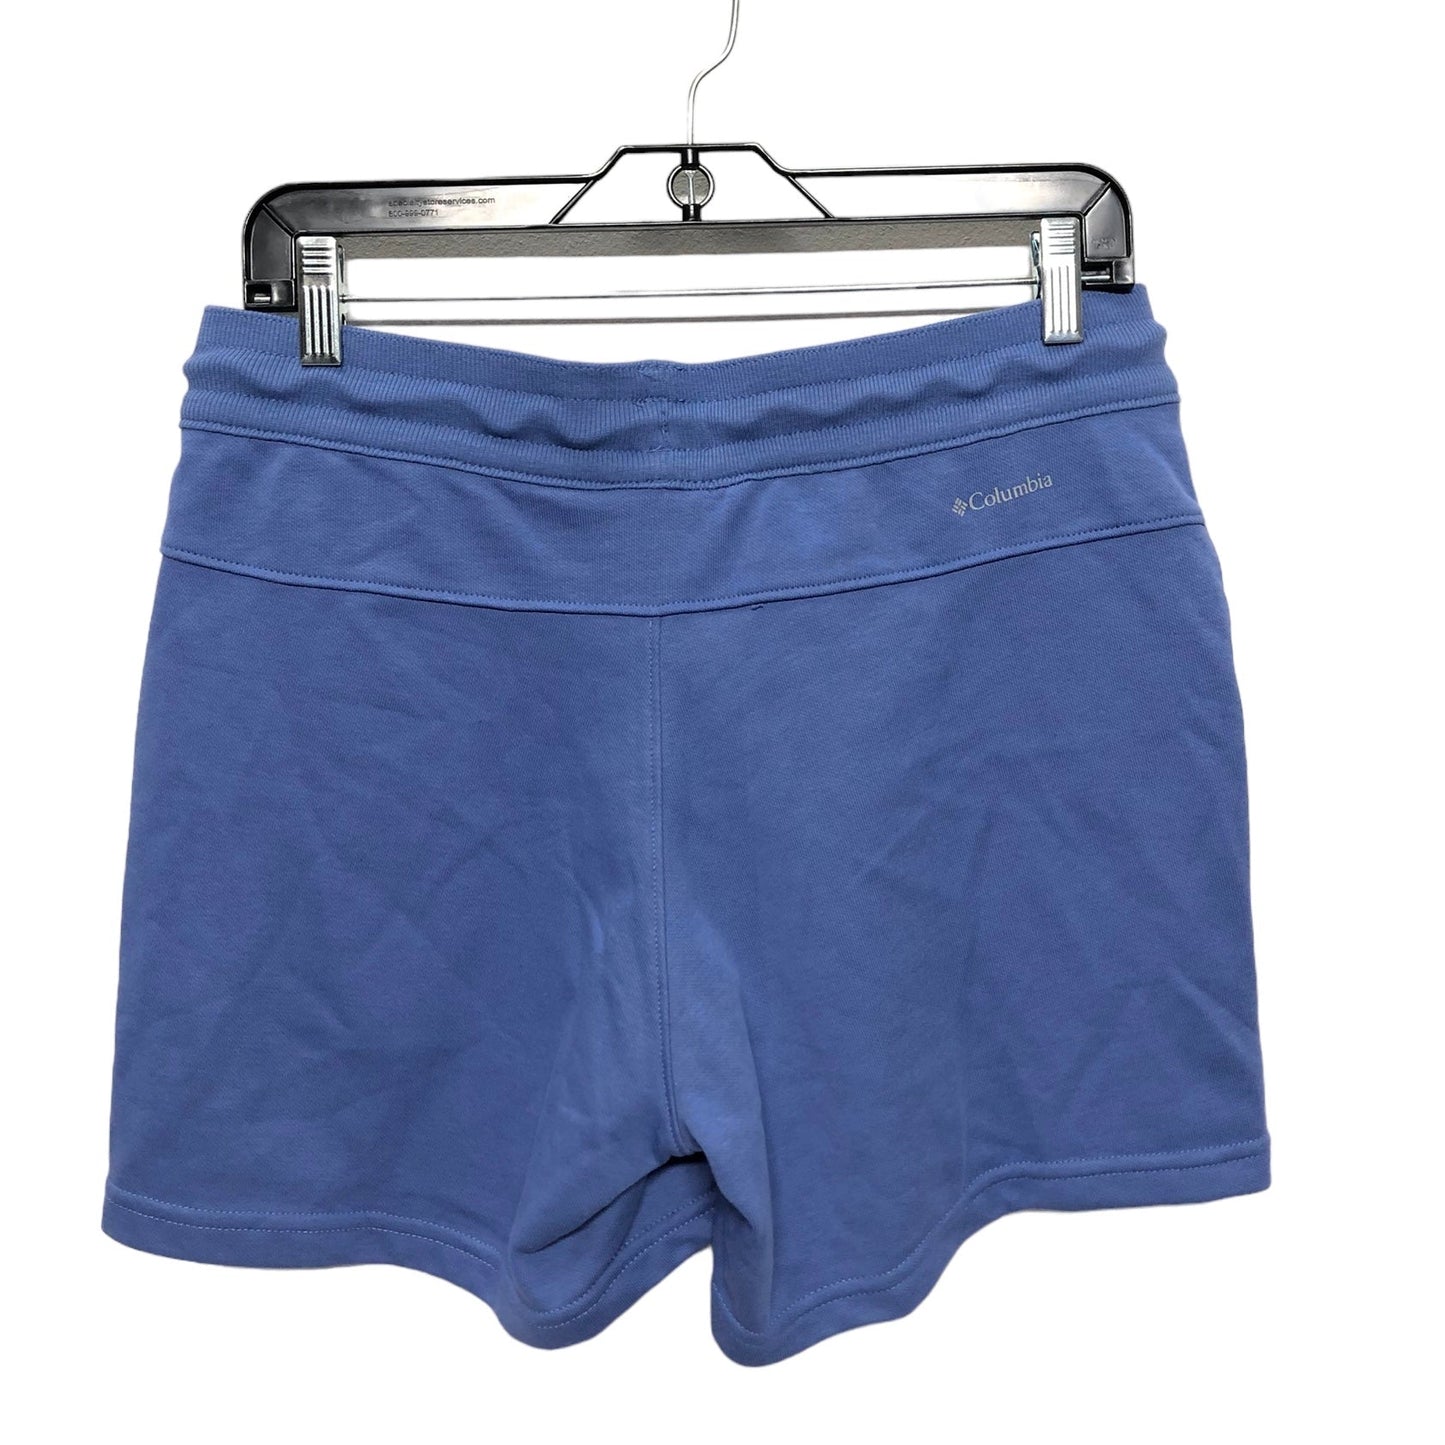 Shorts By Columbia  Size: S